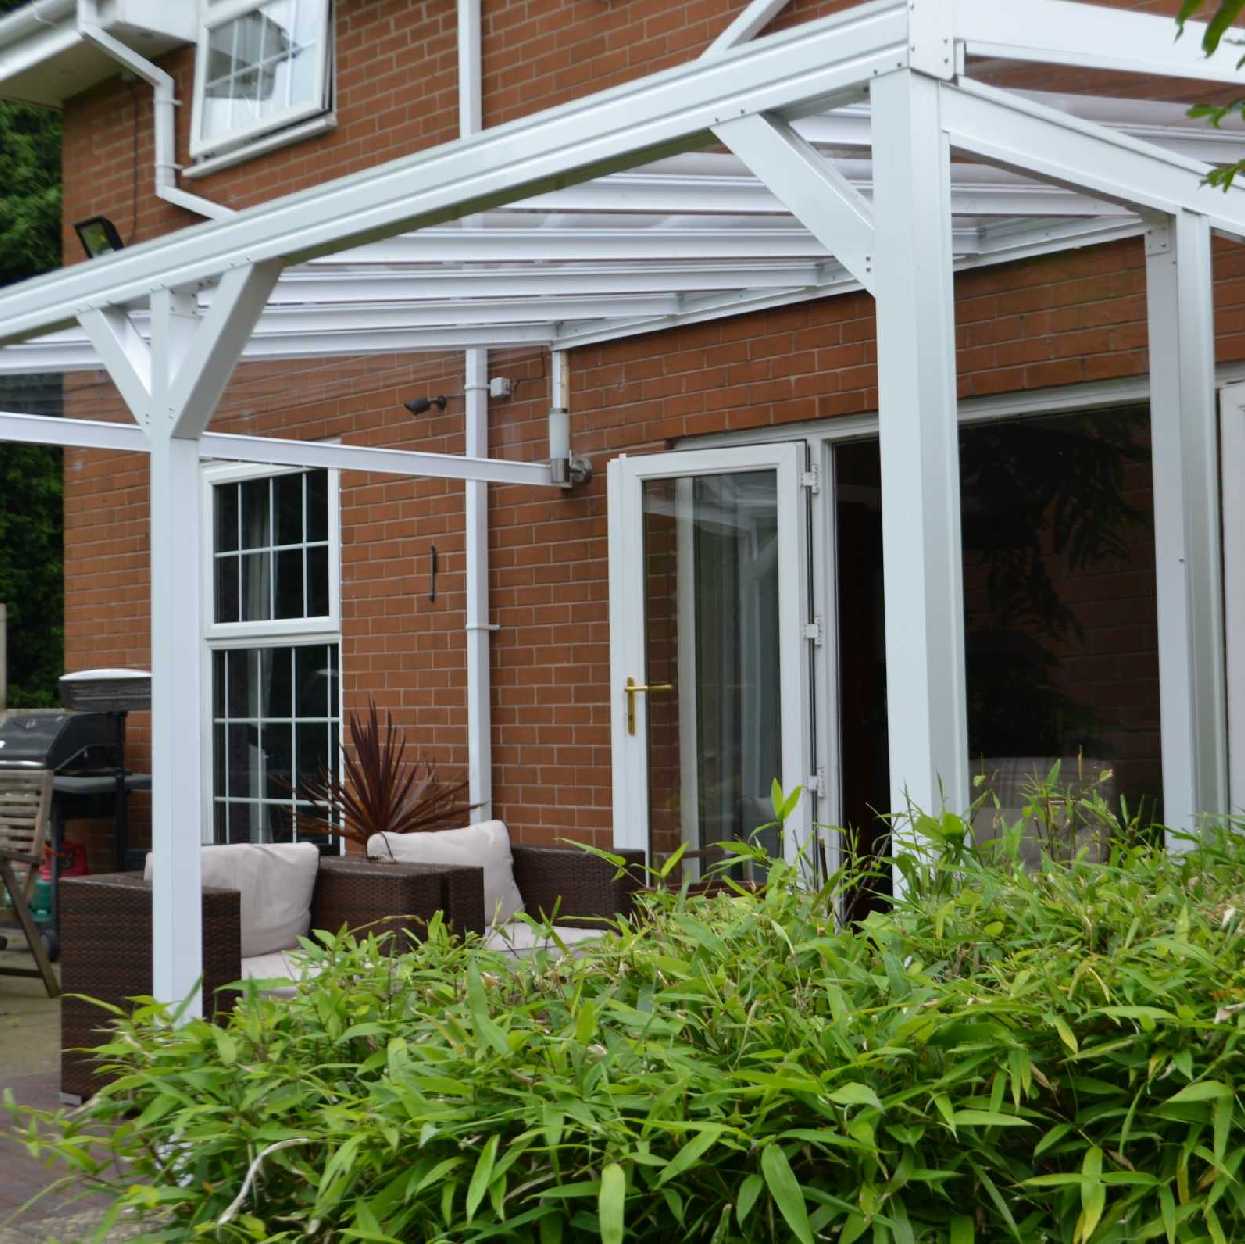 Omega Smart Lean-To Canopy, White with 6mm Glass Clear Plate Polycarbonate Glazing - 10.5m (W) x 3.0m (P), (5) Supporting Posts from Omega Build